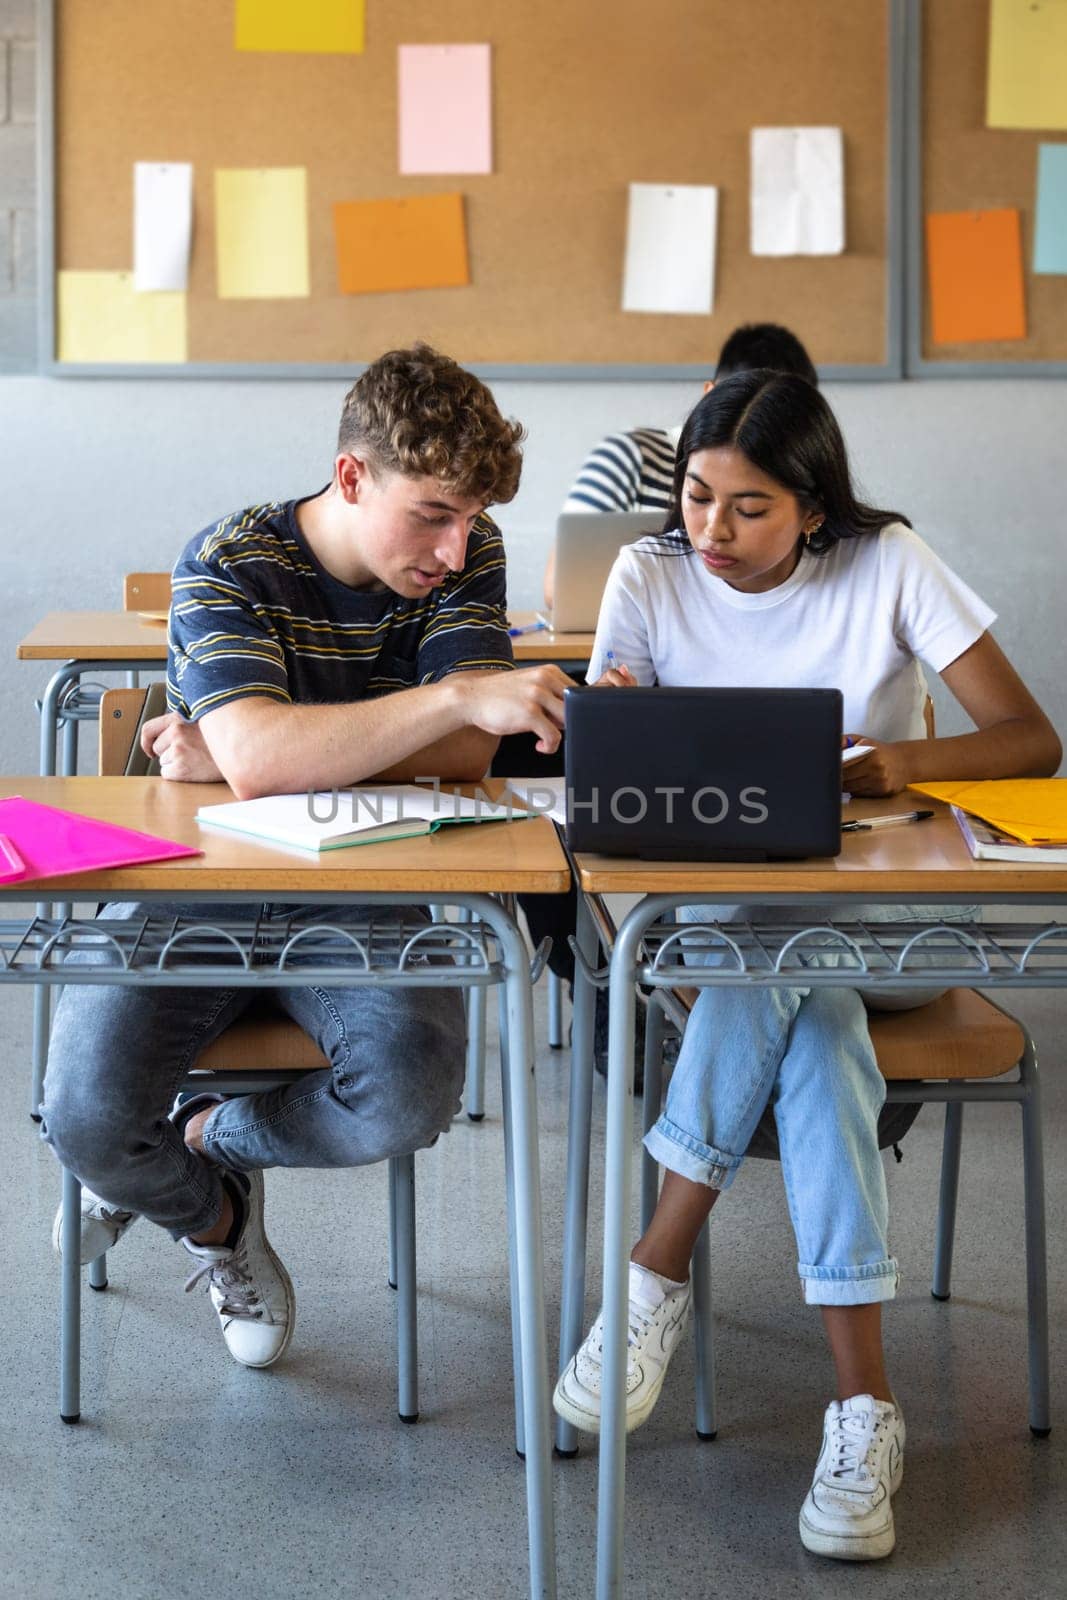 Caucasian teen boy and native american teenage female high school students in class working together on school project using laptop. Vertical image. Education concept.